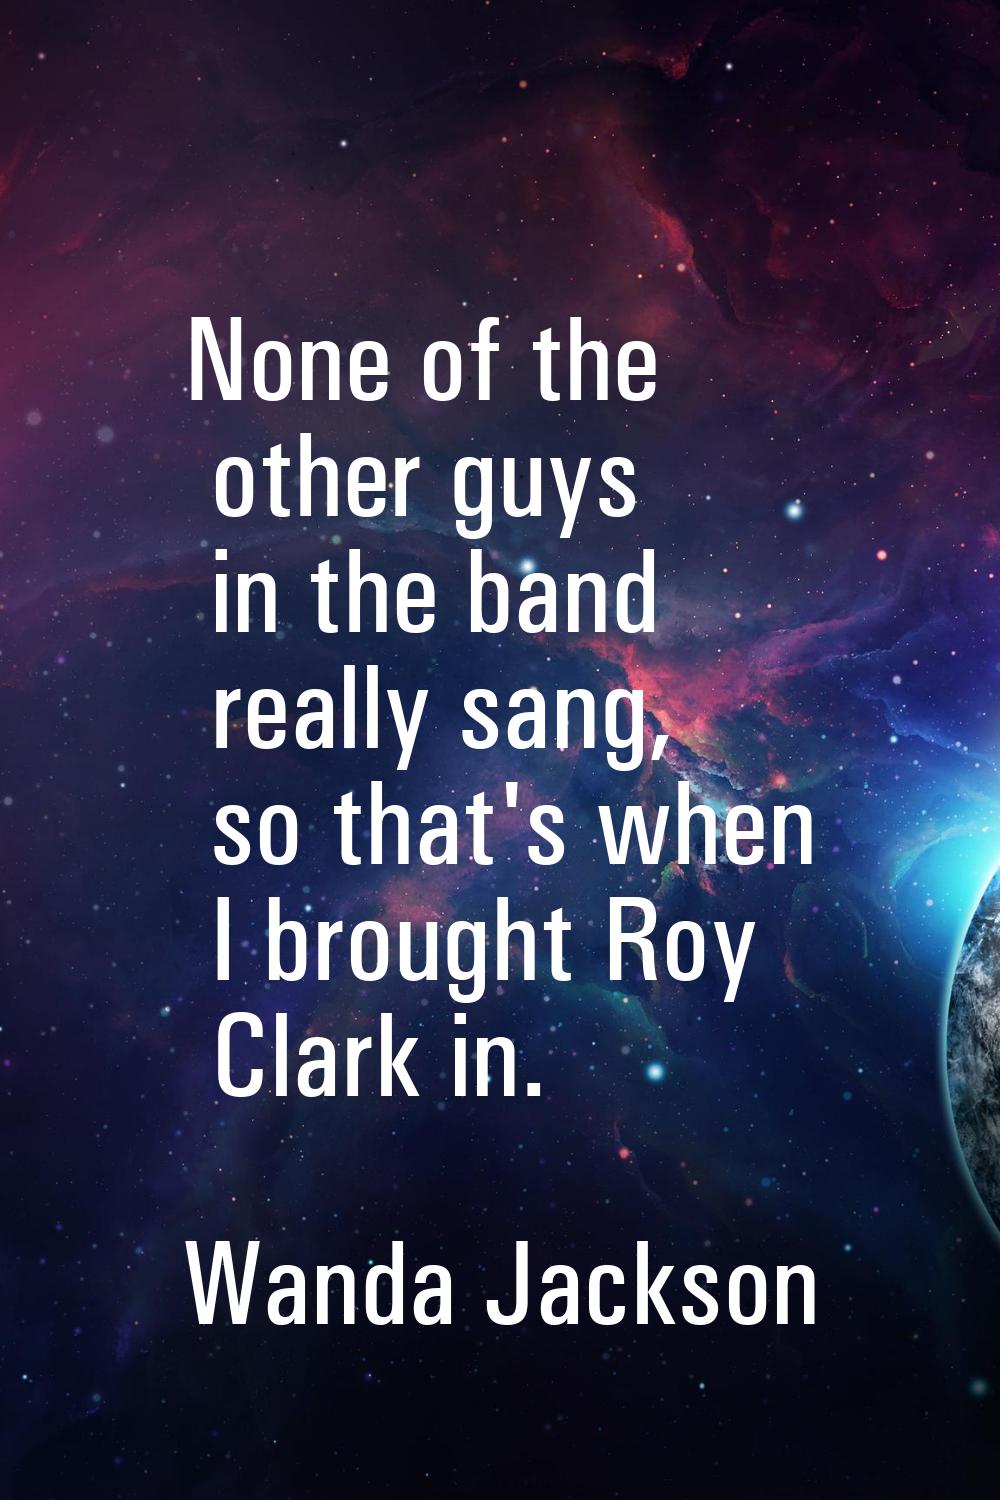 None of the other guys in the band really sang, so that's when I brought Roy Clark in.